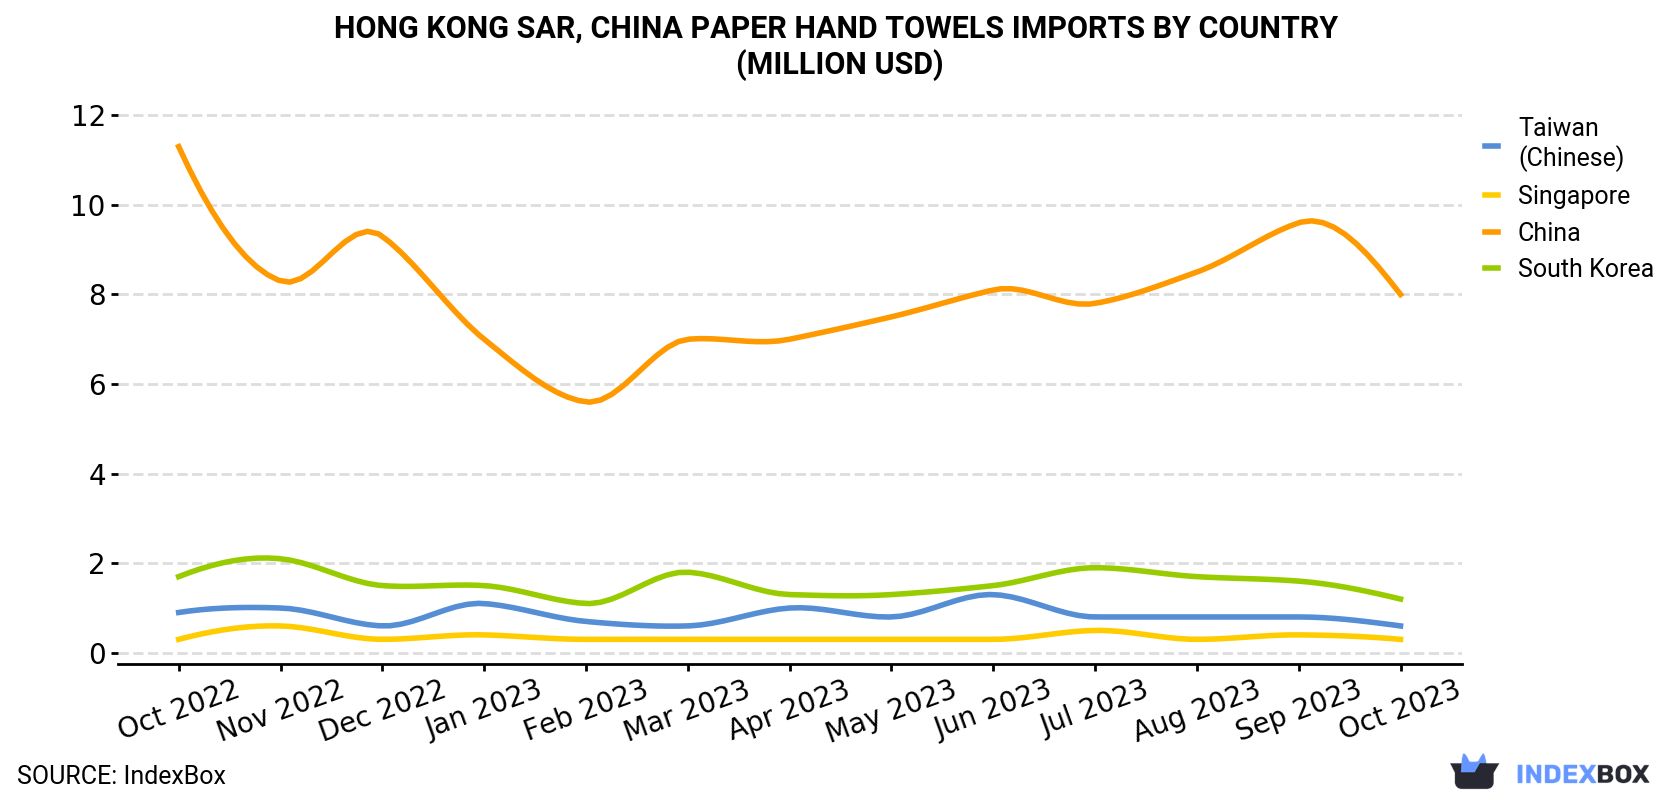 Hong Kong Paper Hand Towels Imports By Country (Million USD)